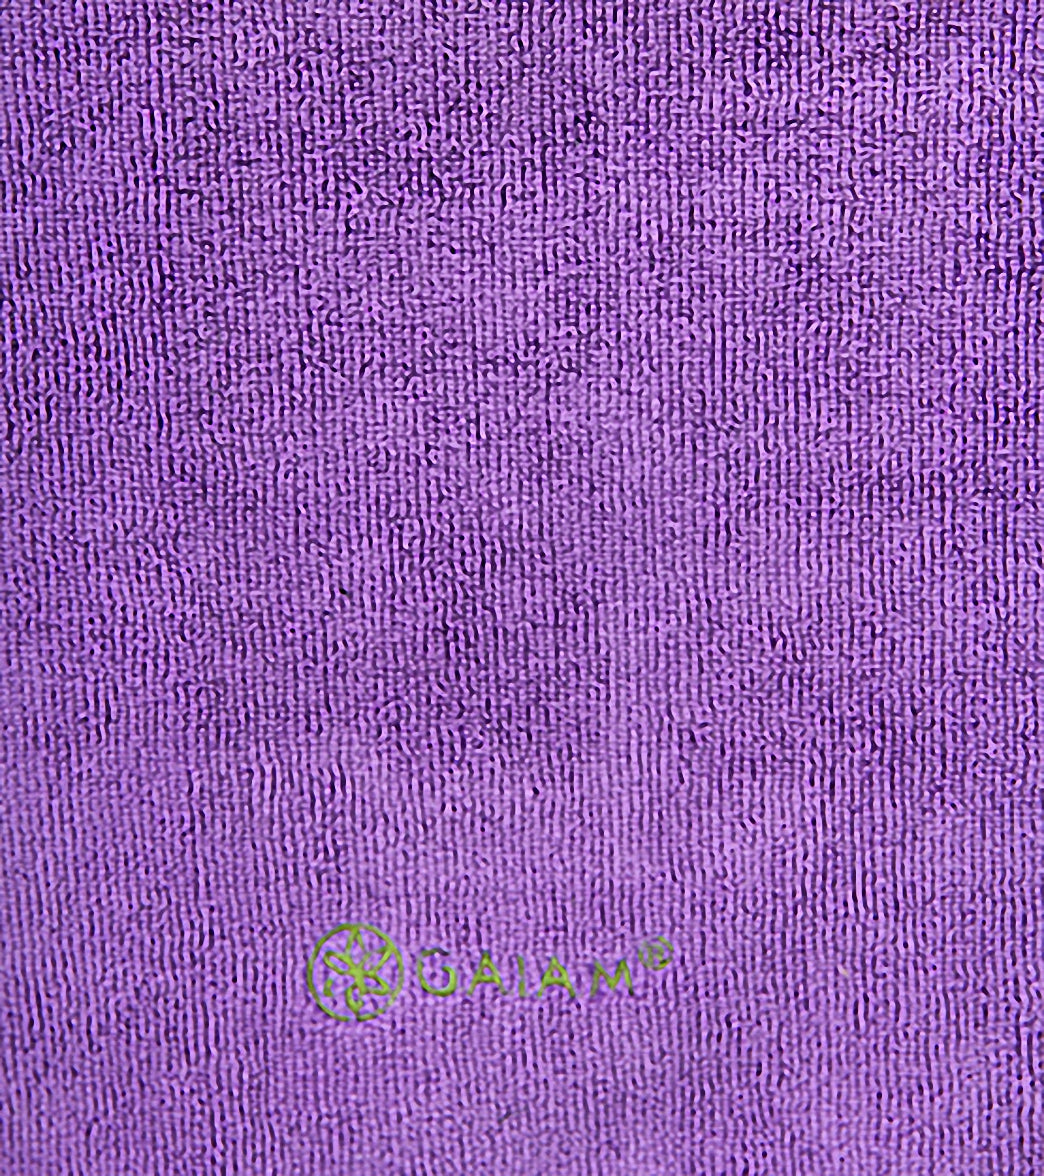 Gaiam Thisty Yoga Towel 2-Pack at